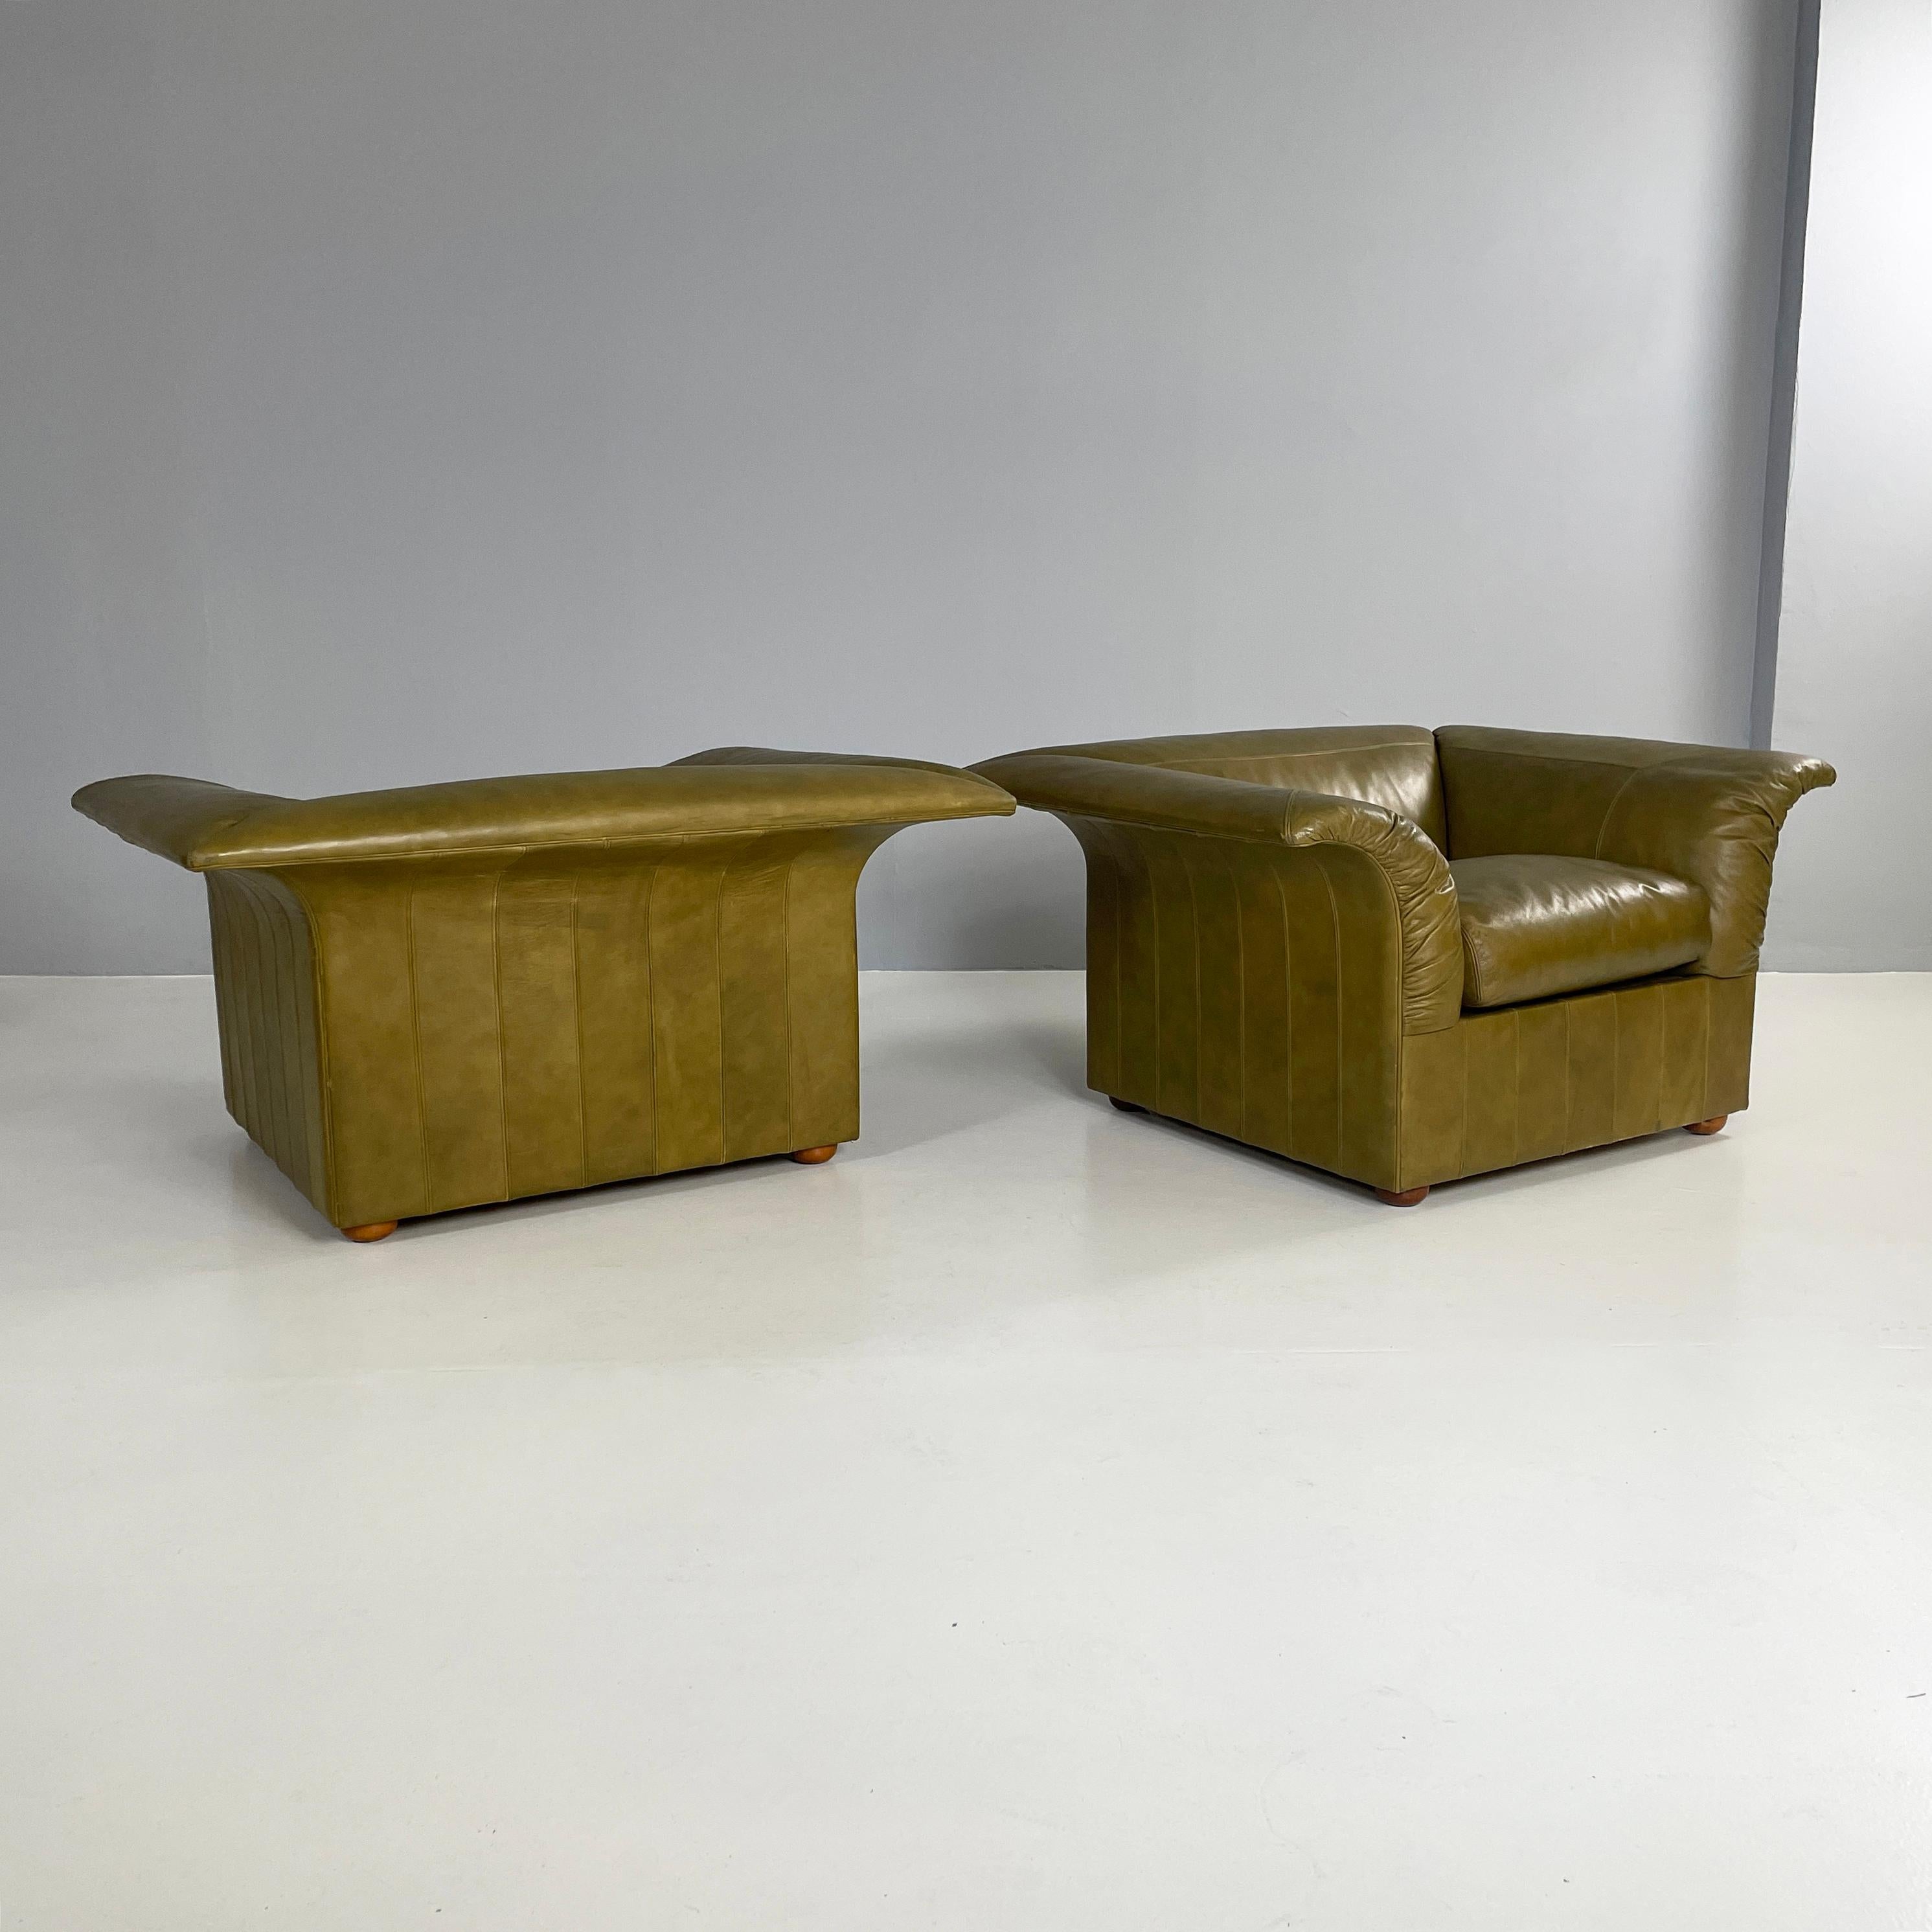 Italian modern Green leather armchairs by  Luigi Massoni for Poltrona Faru, 1970s
Three-seater sofa fully padded and covered in dark green leather. The seat is made up of 3 padded cushions. The cantilevered backrest and armrests feature decorative